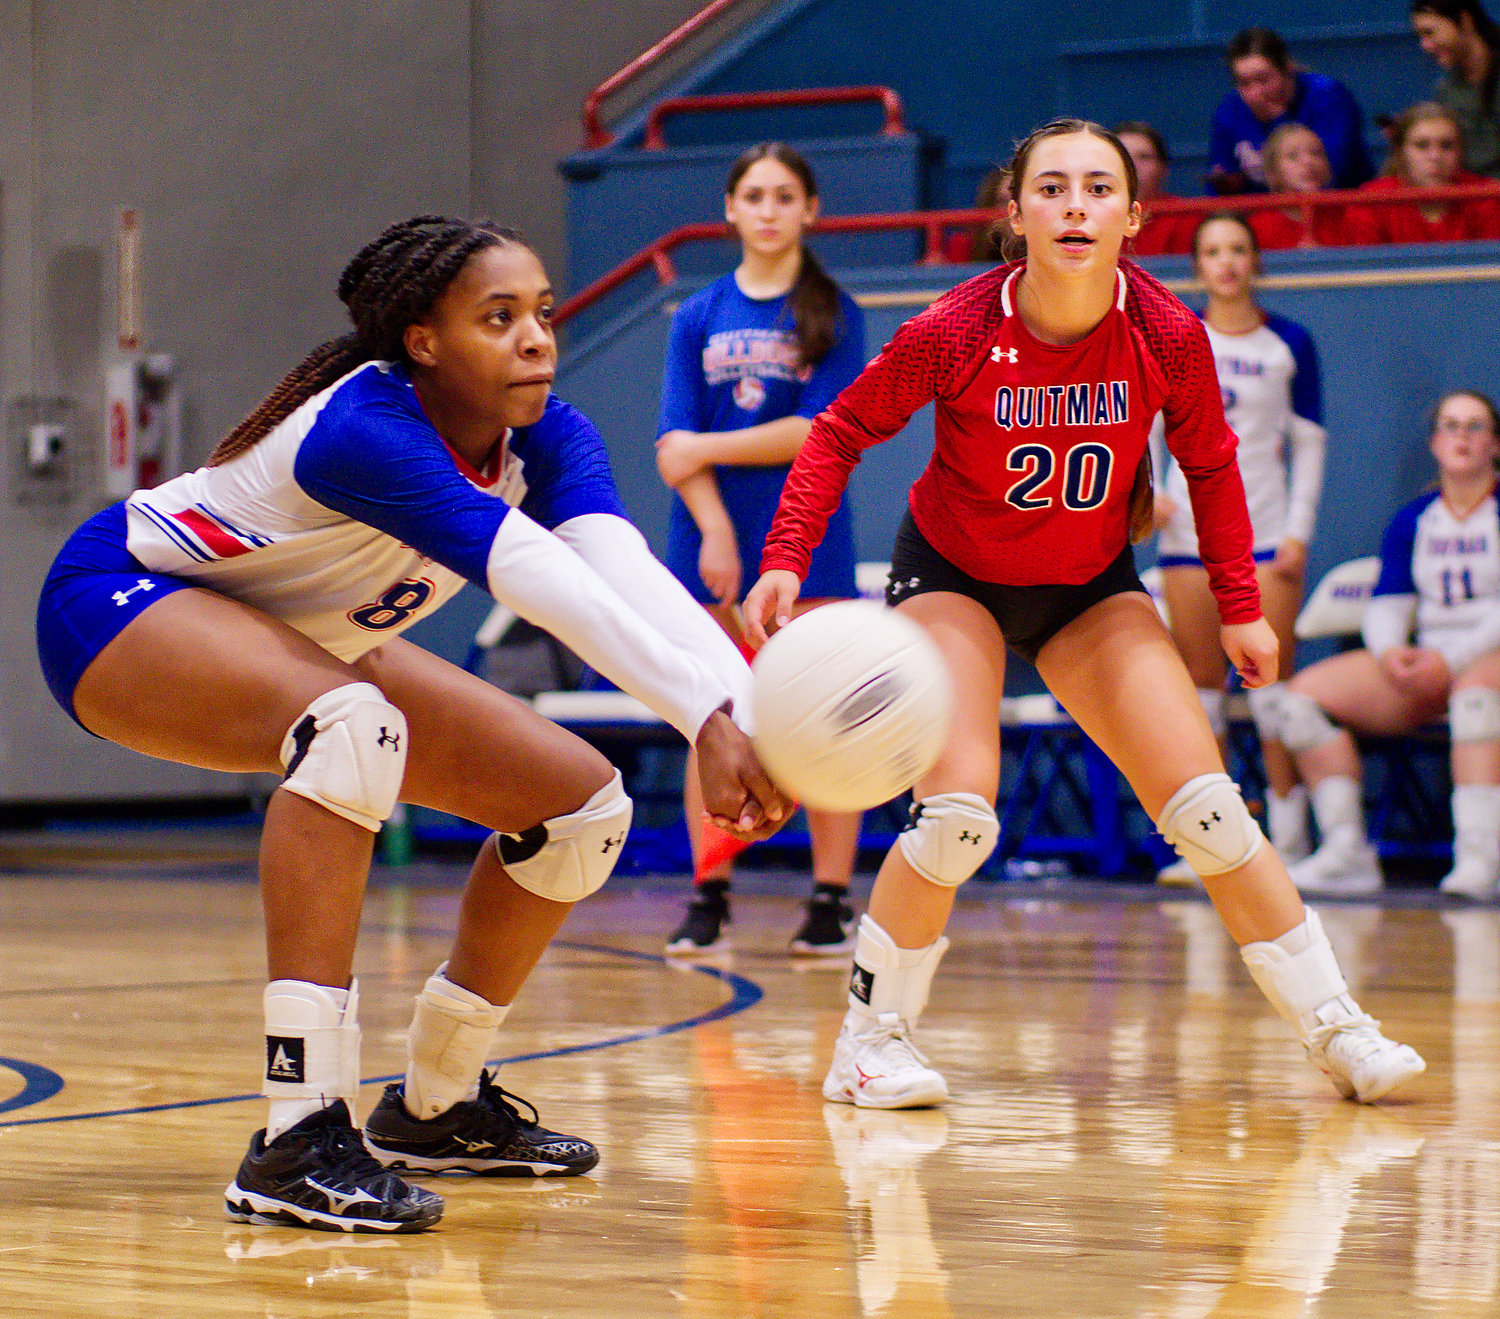 Newcomer of the year, sophomore Allie Berry, handles a dig as first-team all-district teammate Addison Marcee awaits, Aug. 23 at home vs. Quinlan-Boles. [view more shots from the volleyball season]